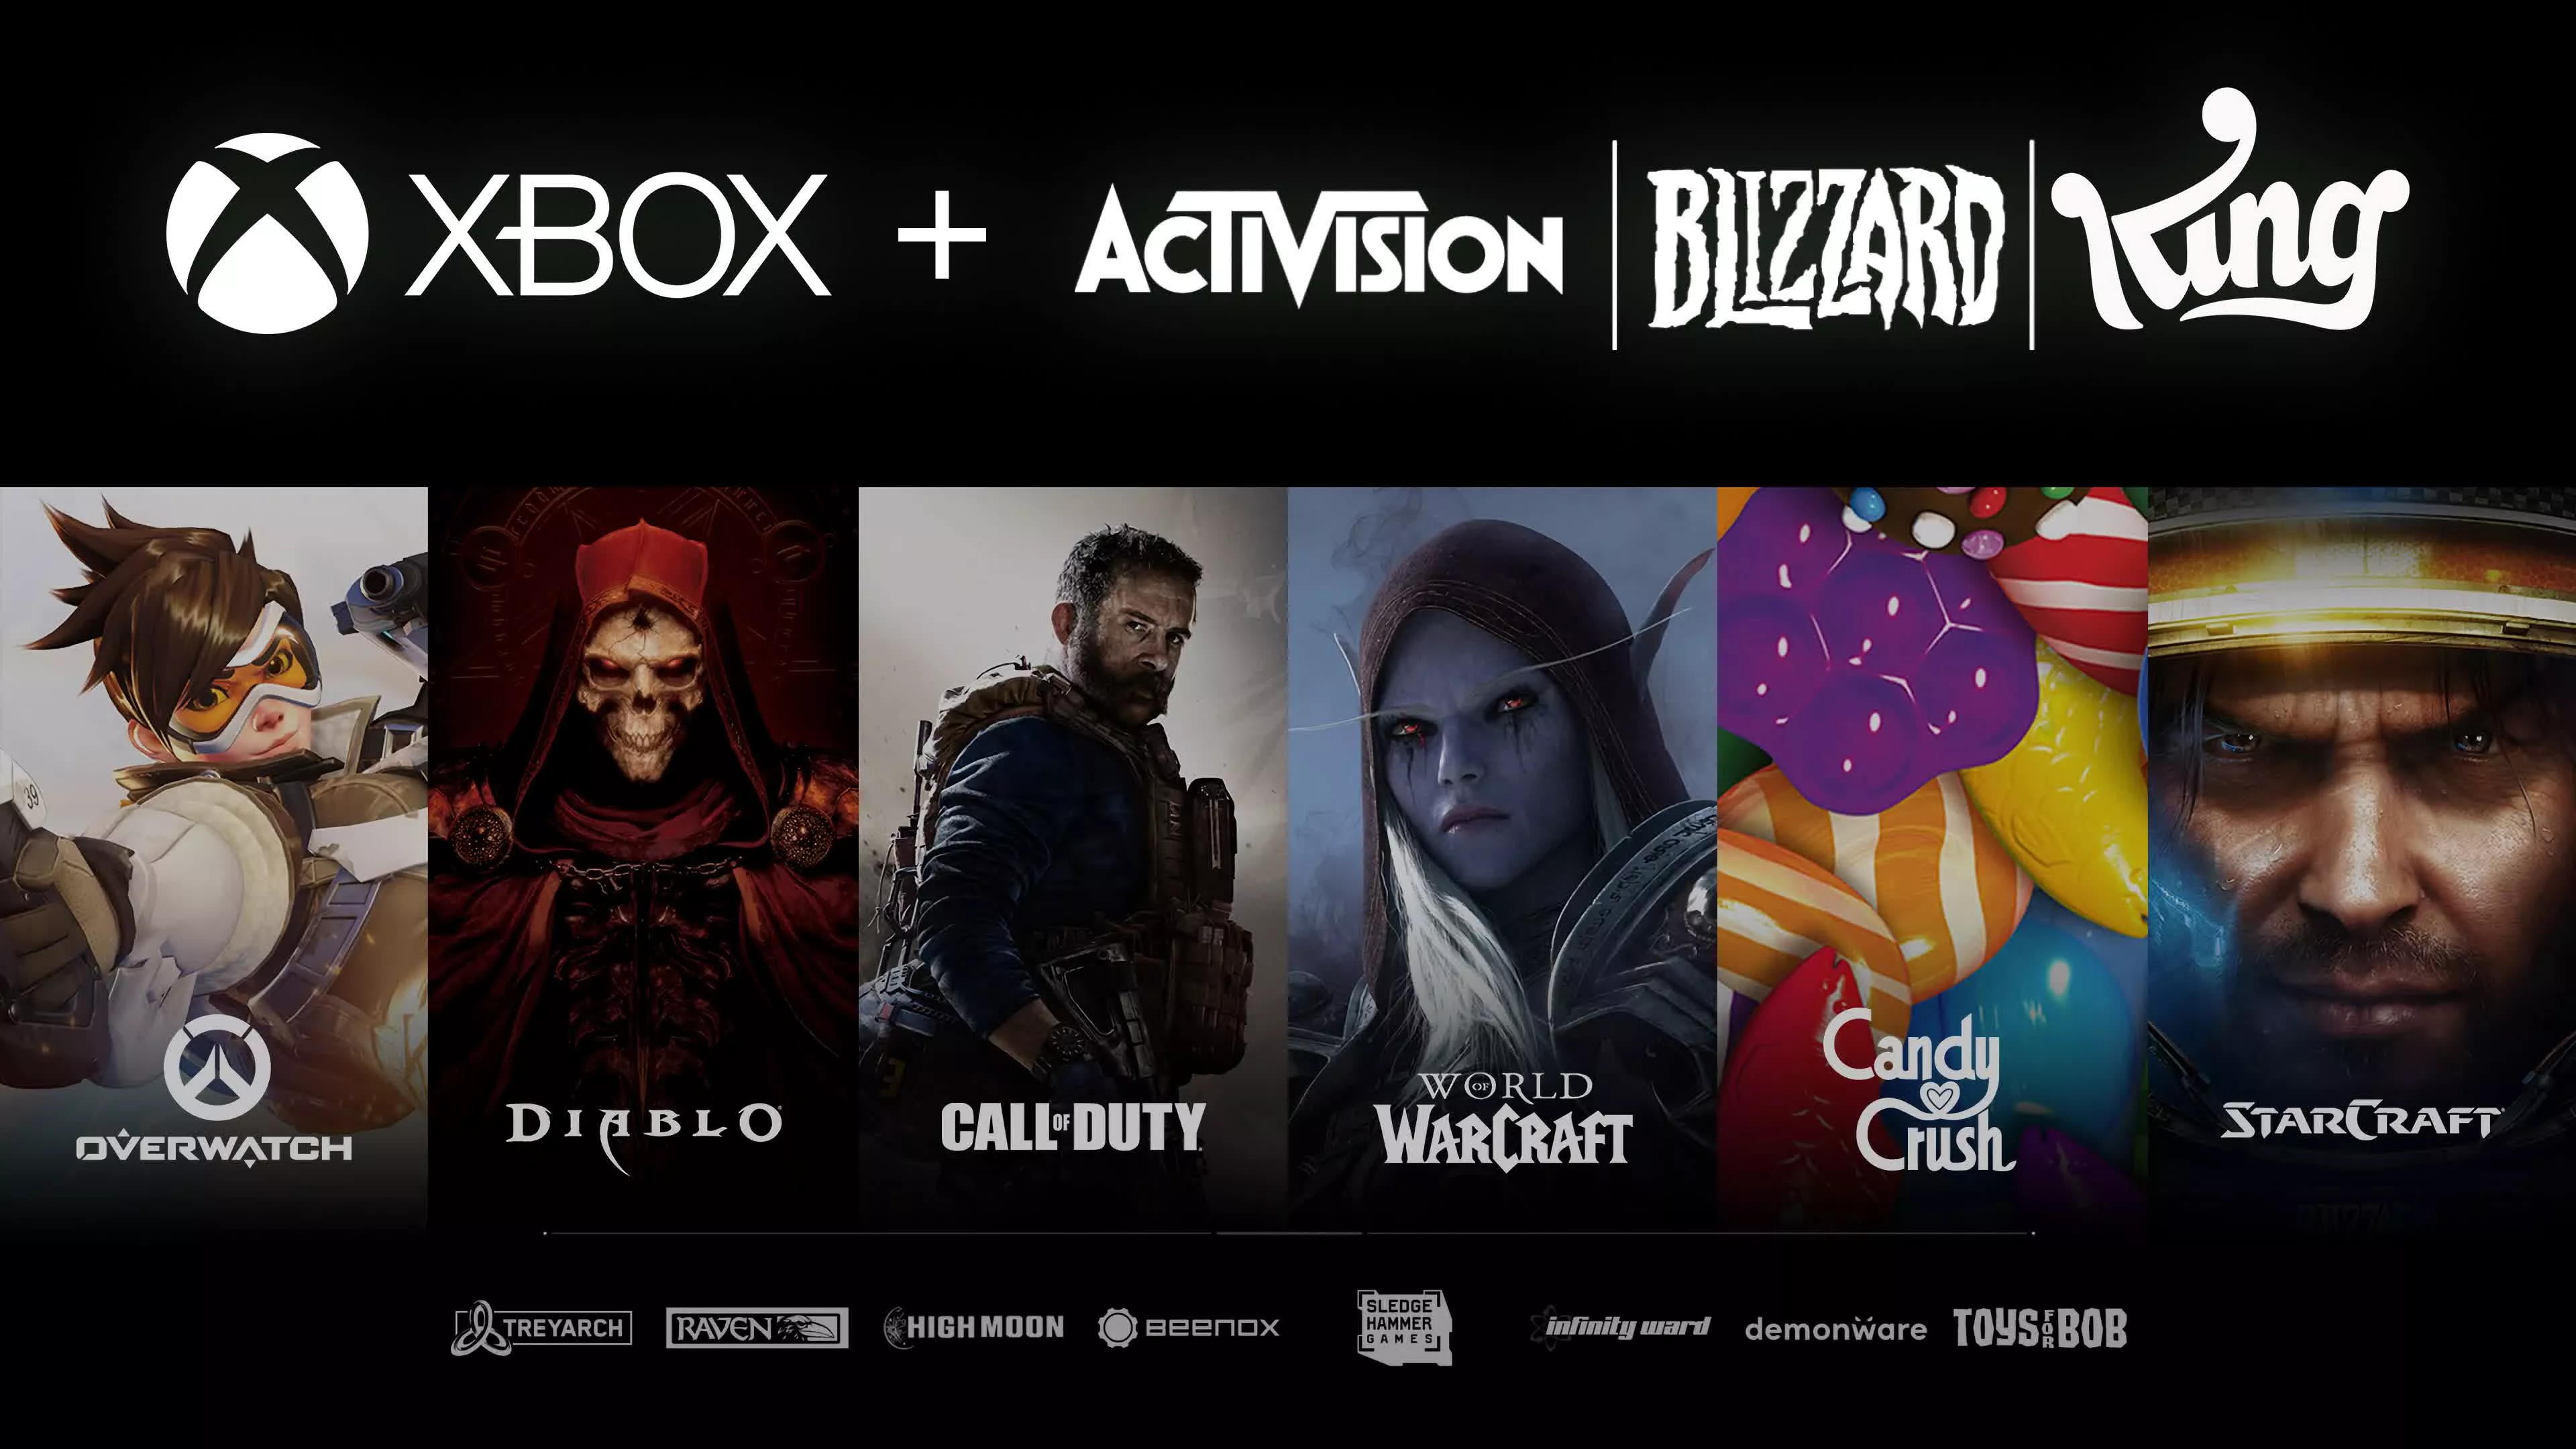 Three-quarters of public comments want Microsoft to take over Activision Blizzard